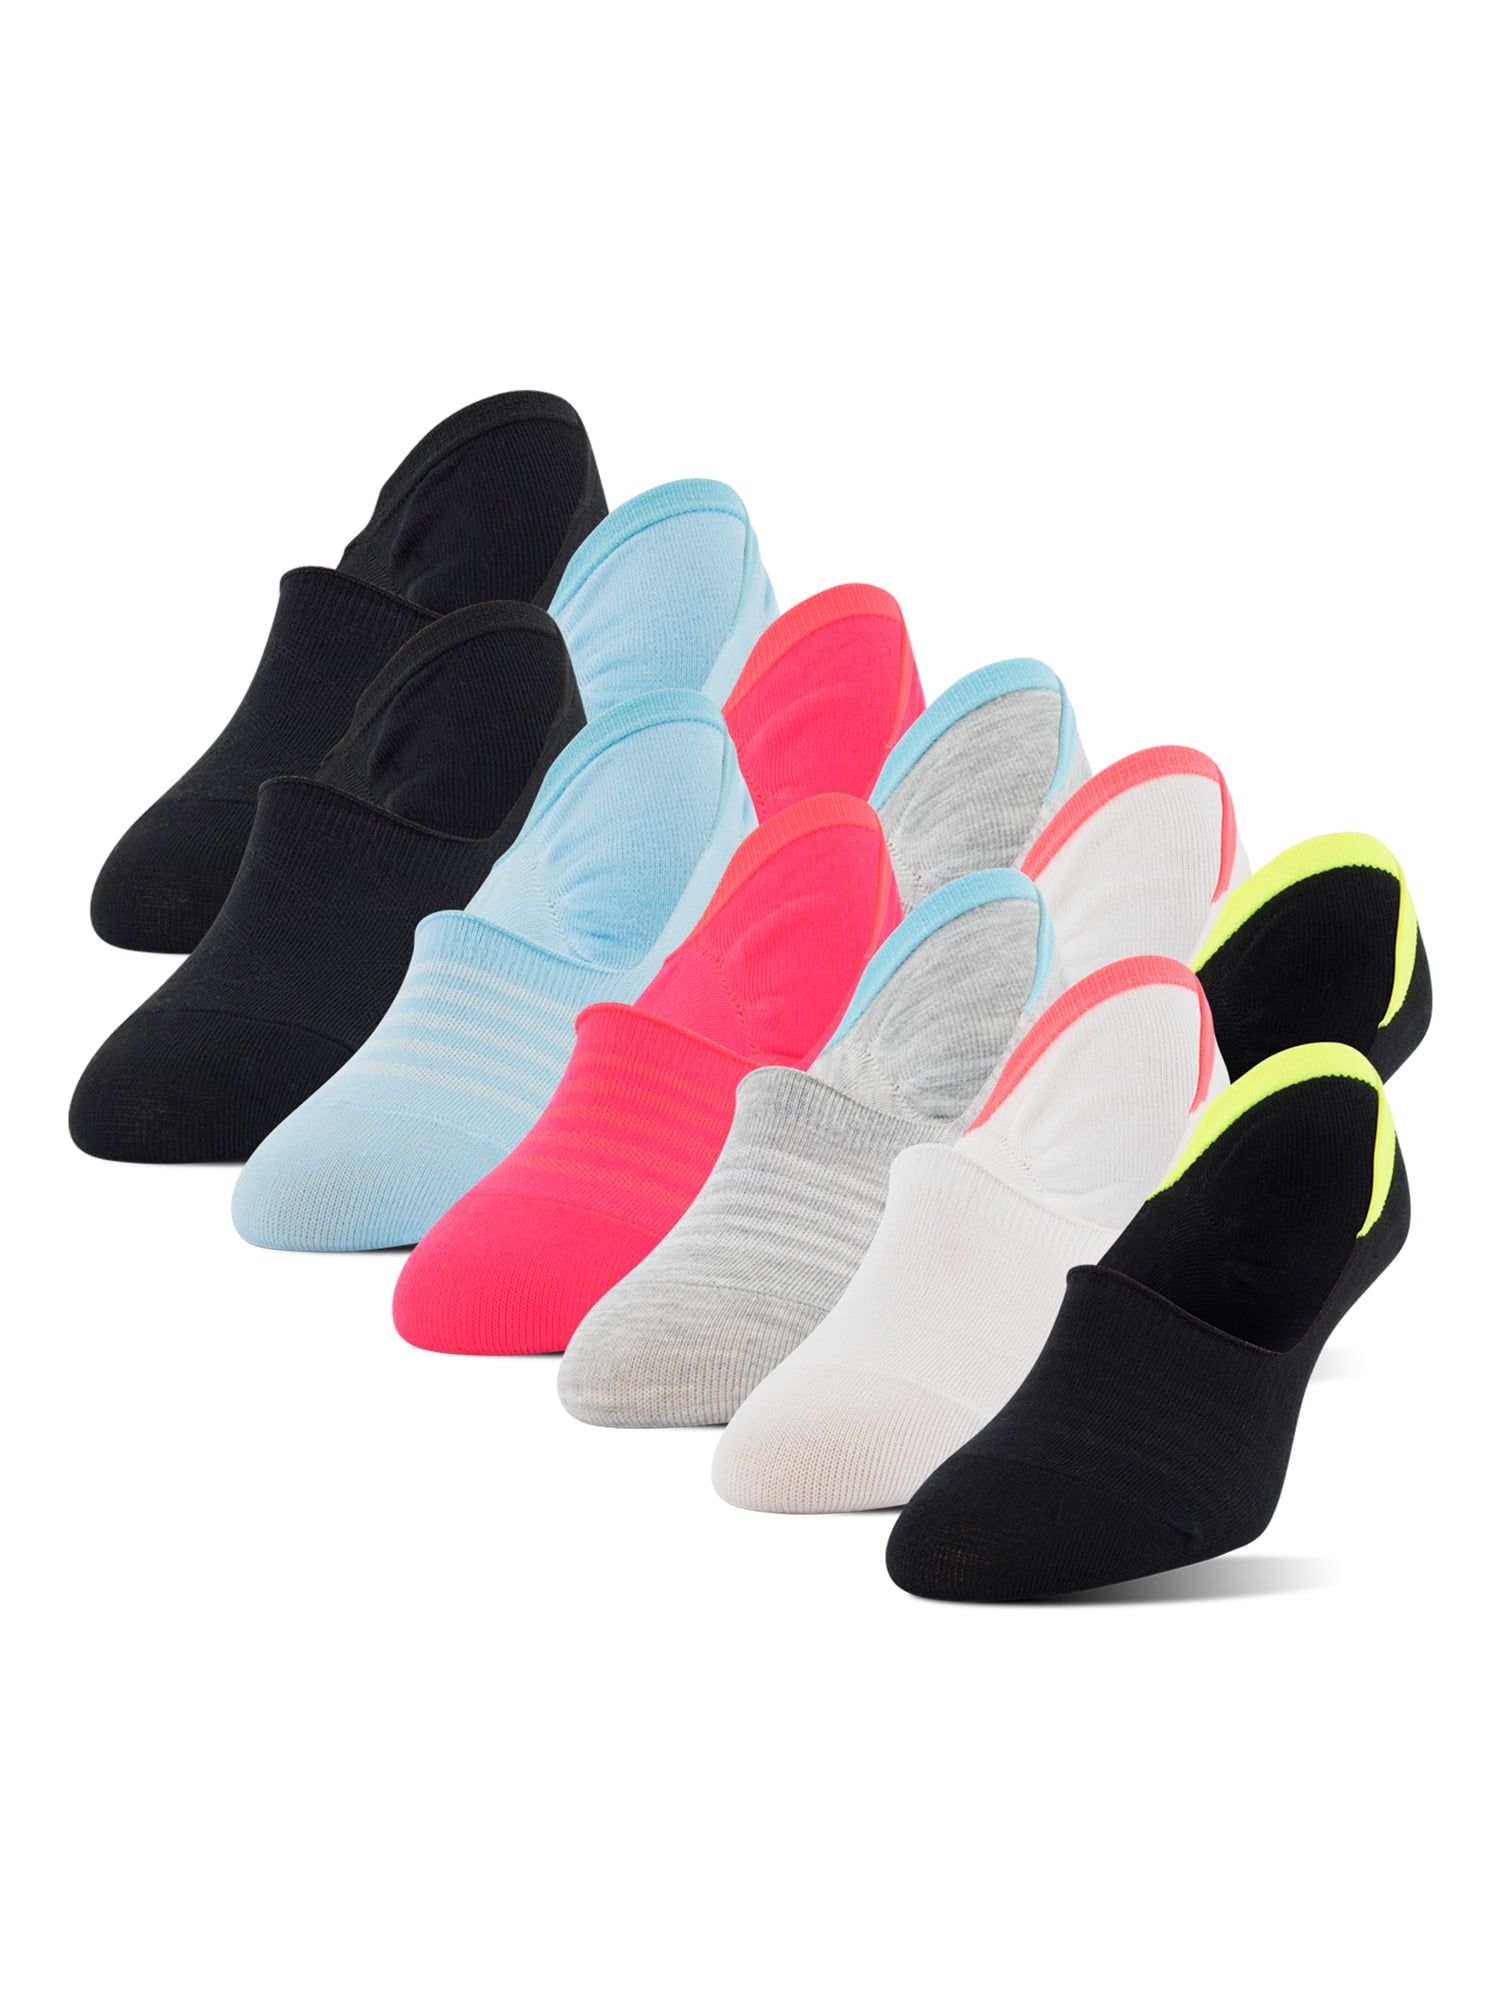 black/white/sport grey/pink/blue PEDS Womens Mid Cut Liners with Y-Heel Shoe Size: 5-10 12 Pairs